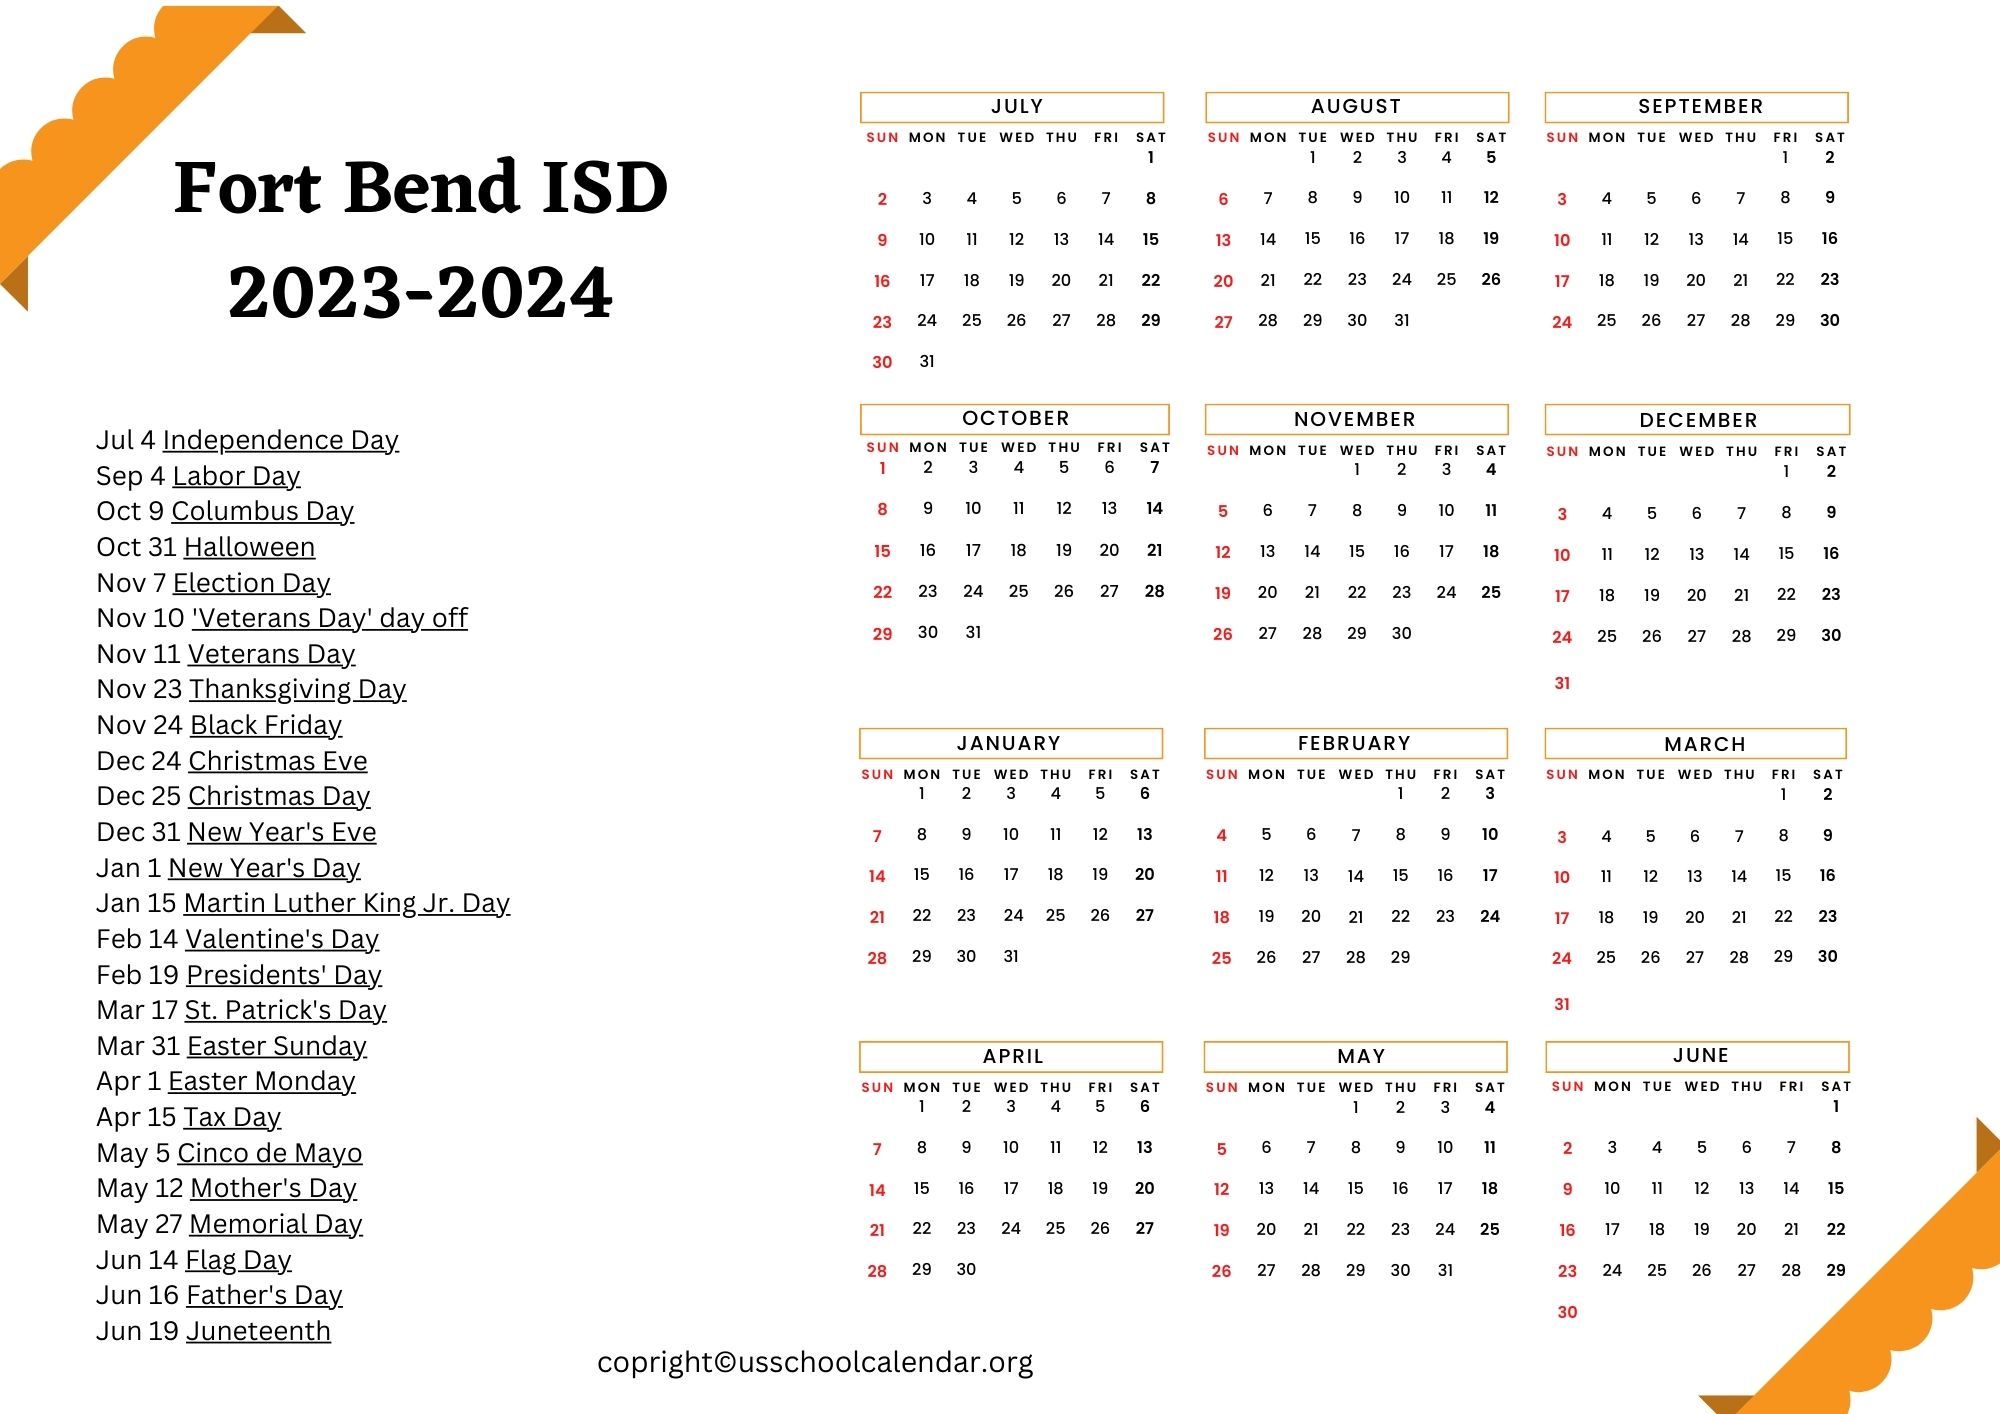 fort-bend-isd-calendar-with-holidays-2023-2024